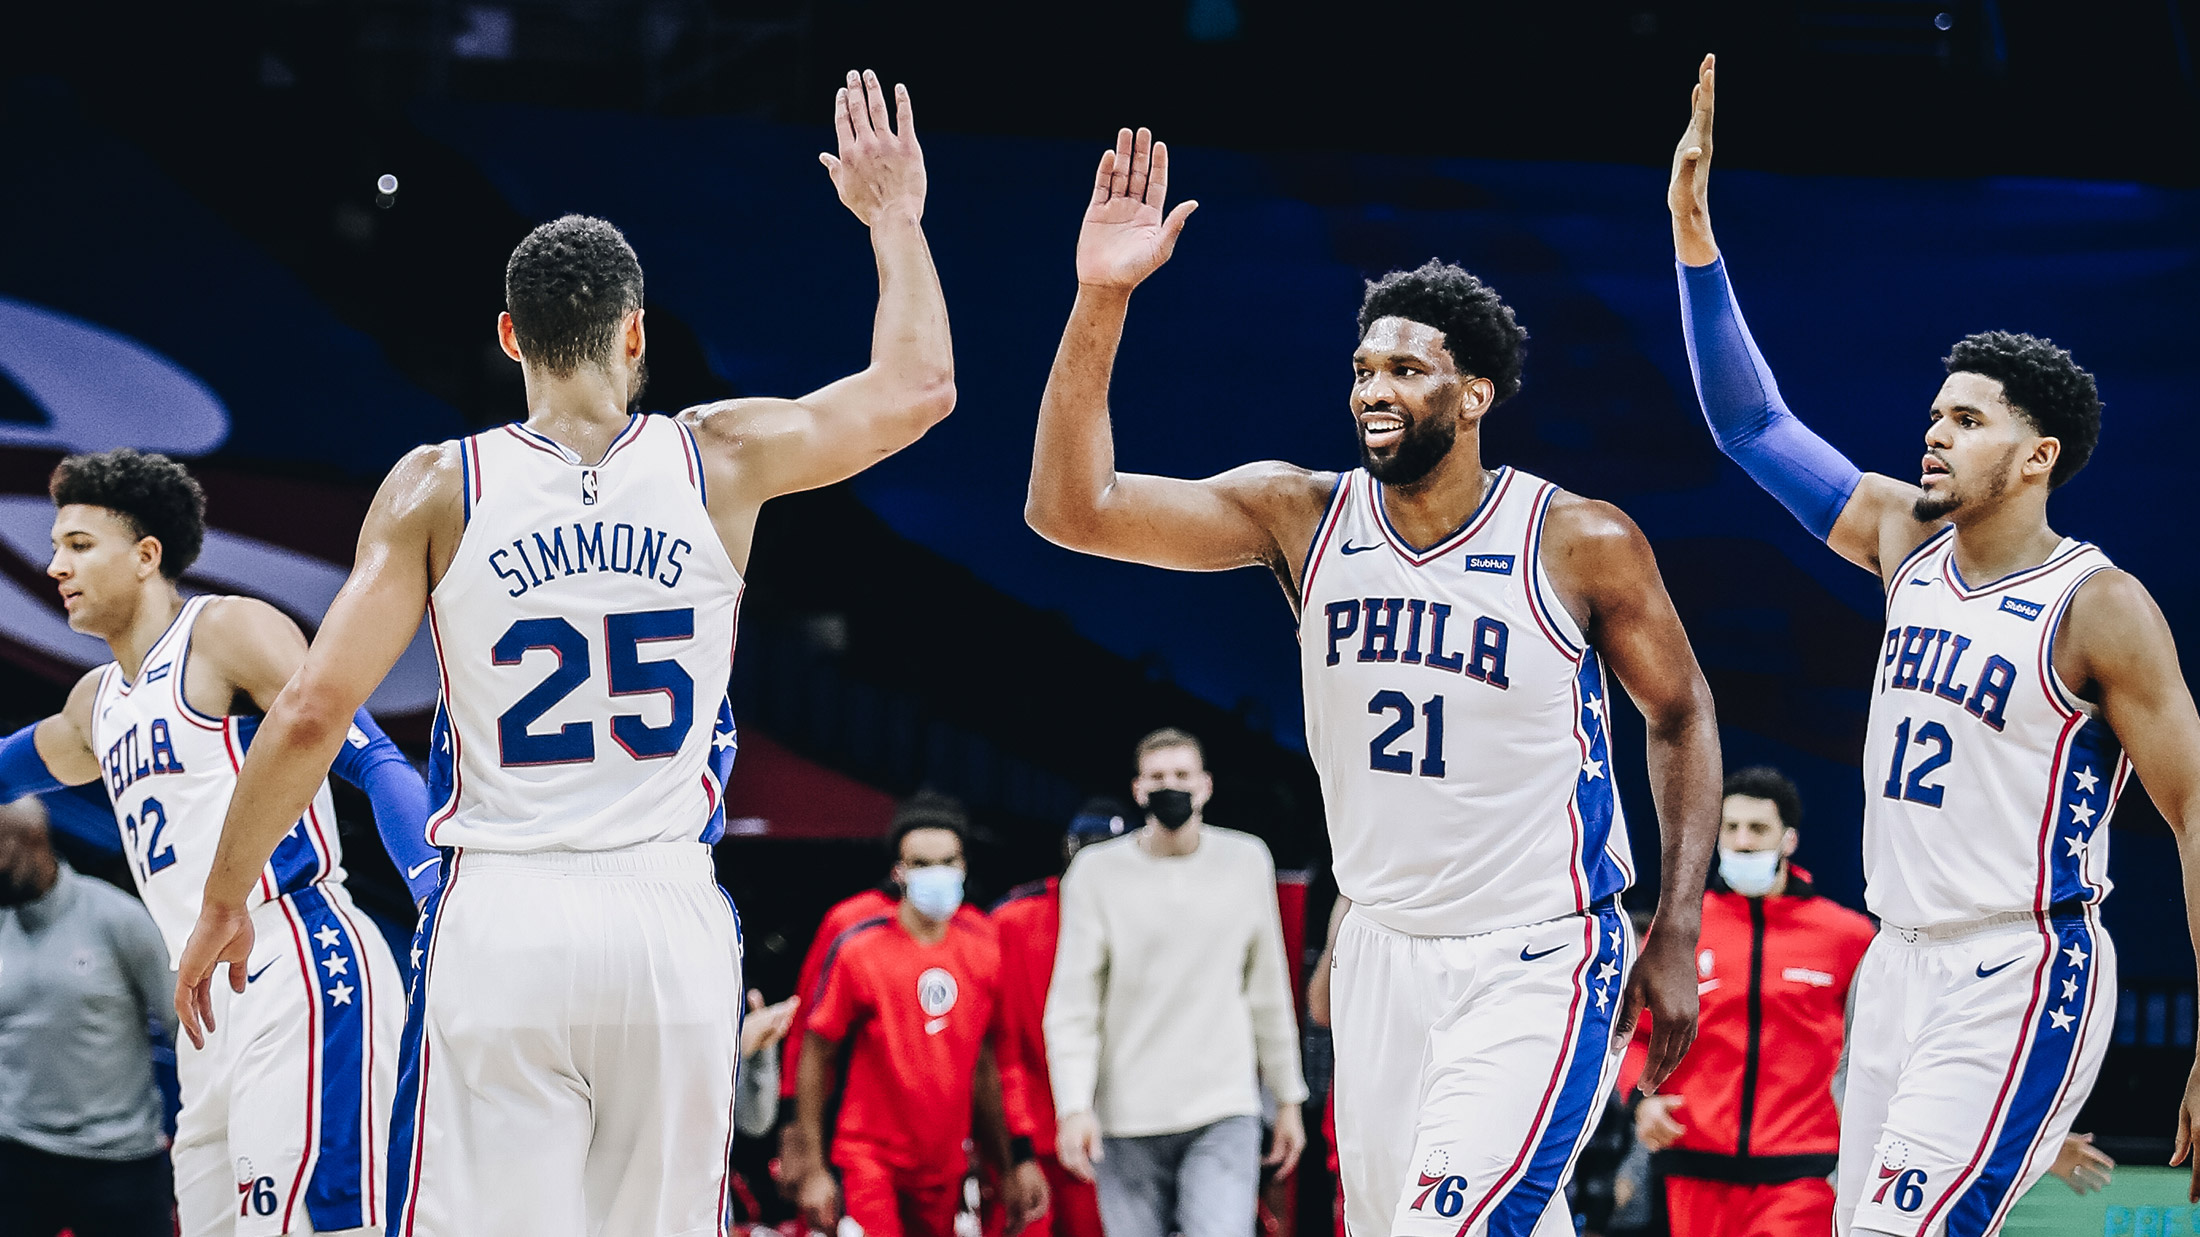 76ers Star Joel Embiid's Knee Scare: What Fans Need to Know About His Meniscus Injury and Comeback Journey